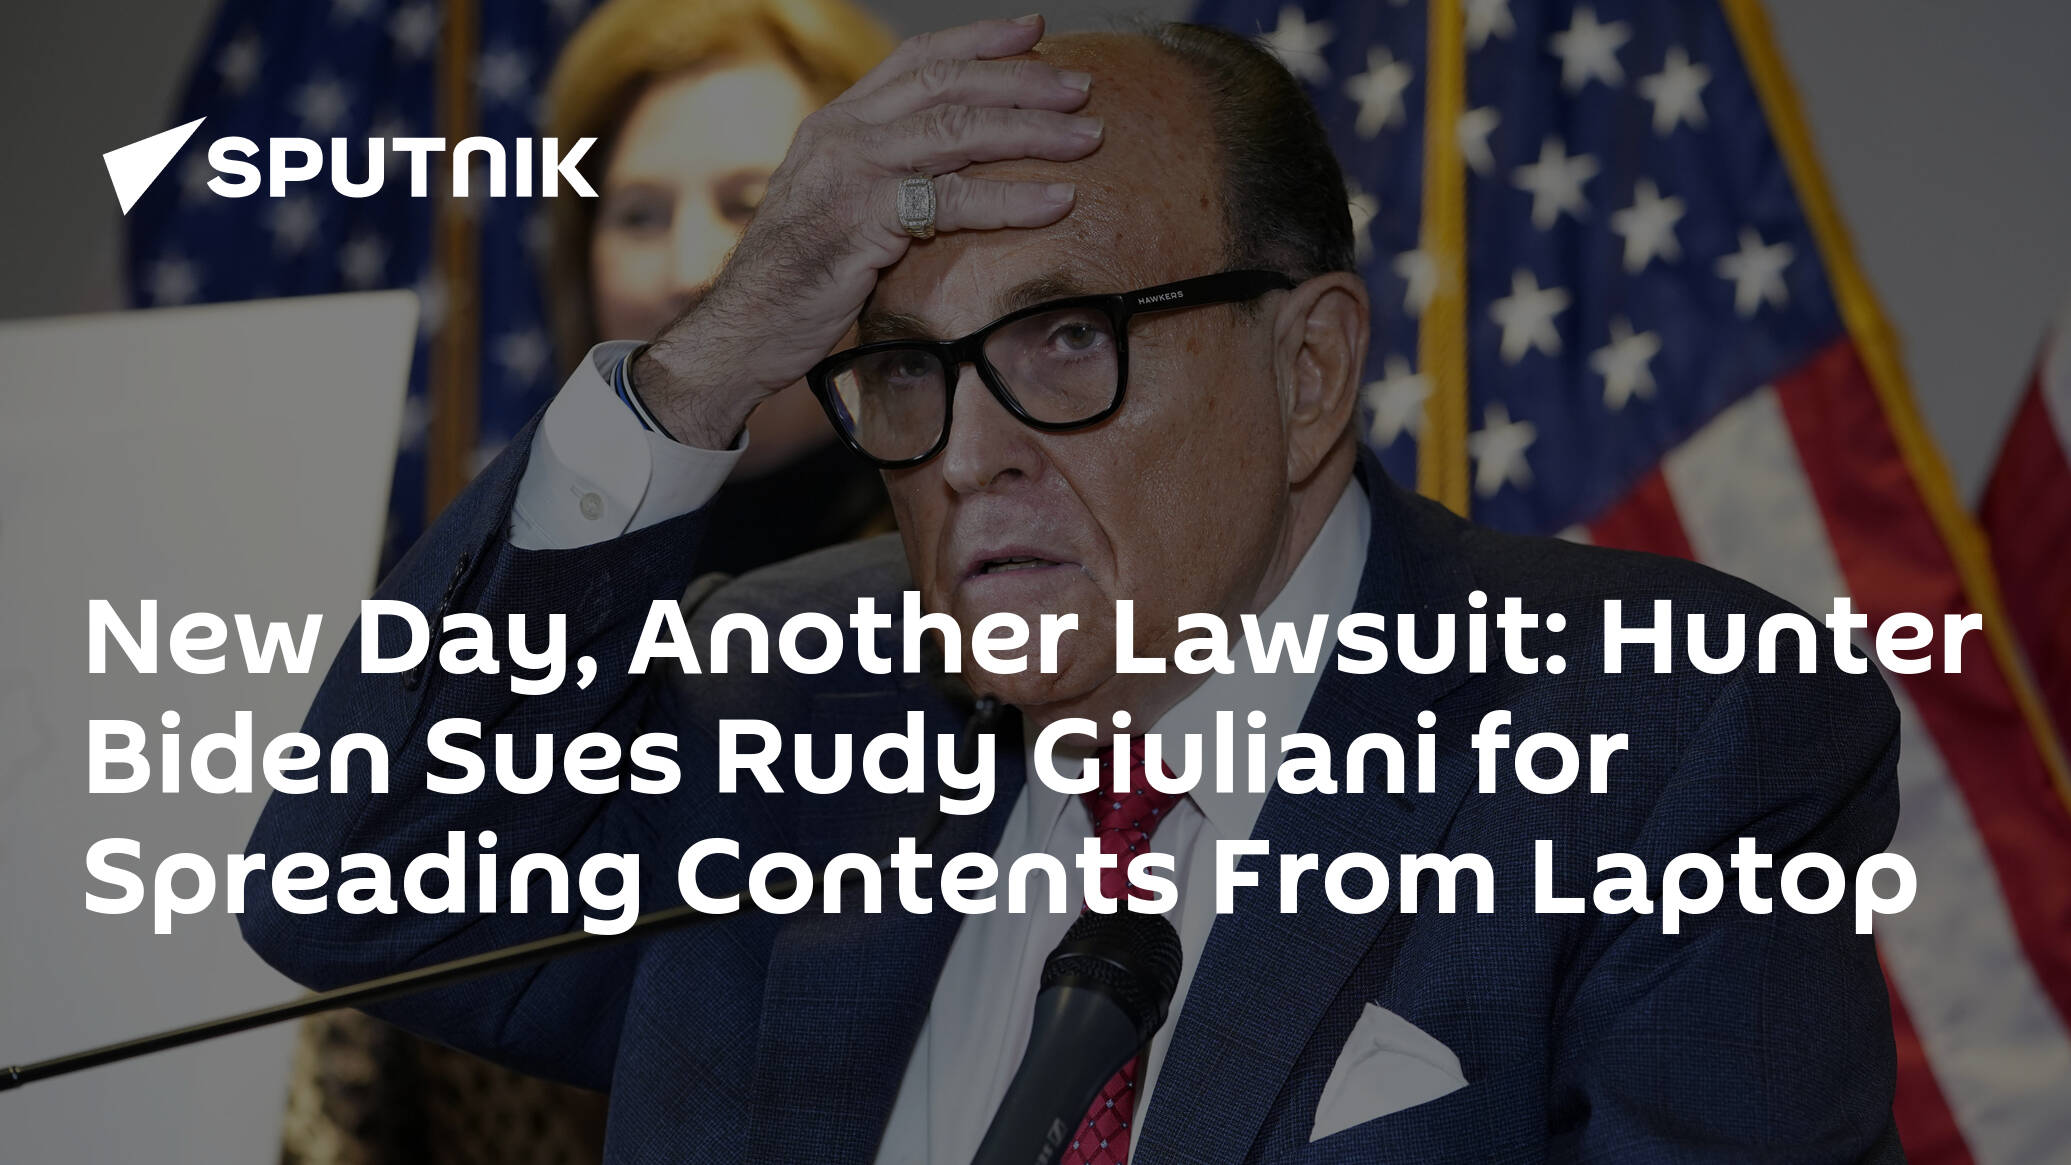 New Day, Another Lawsuit: Hunter Biden Sues Rudy Giuliani for Spreading Contents From Laptop